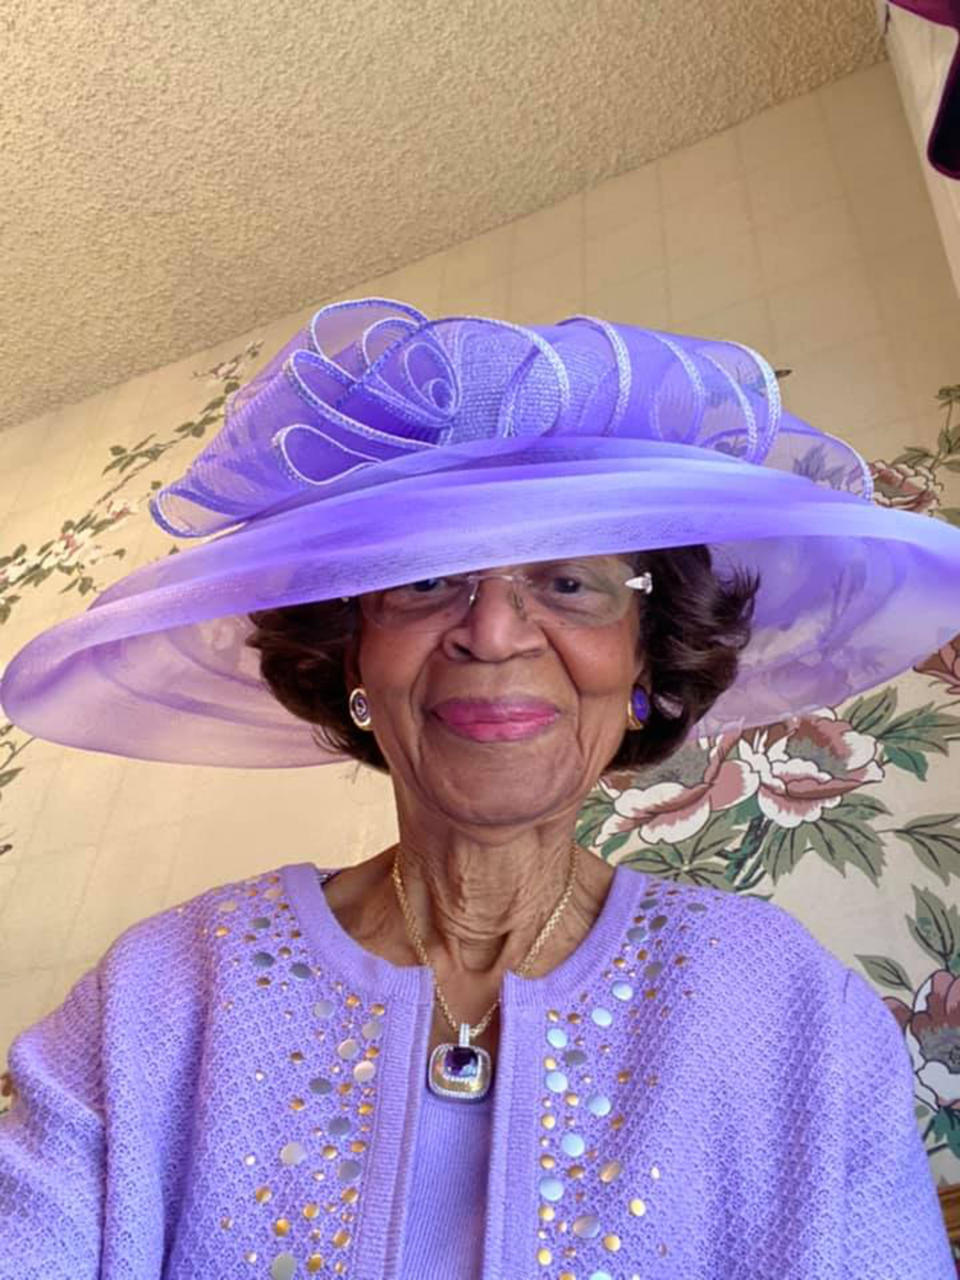 Wimberly has become quite popular for dressing to the nines while attending virtual church services. (La Verne Ford Wimberly)